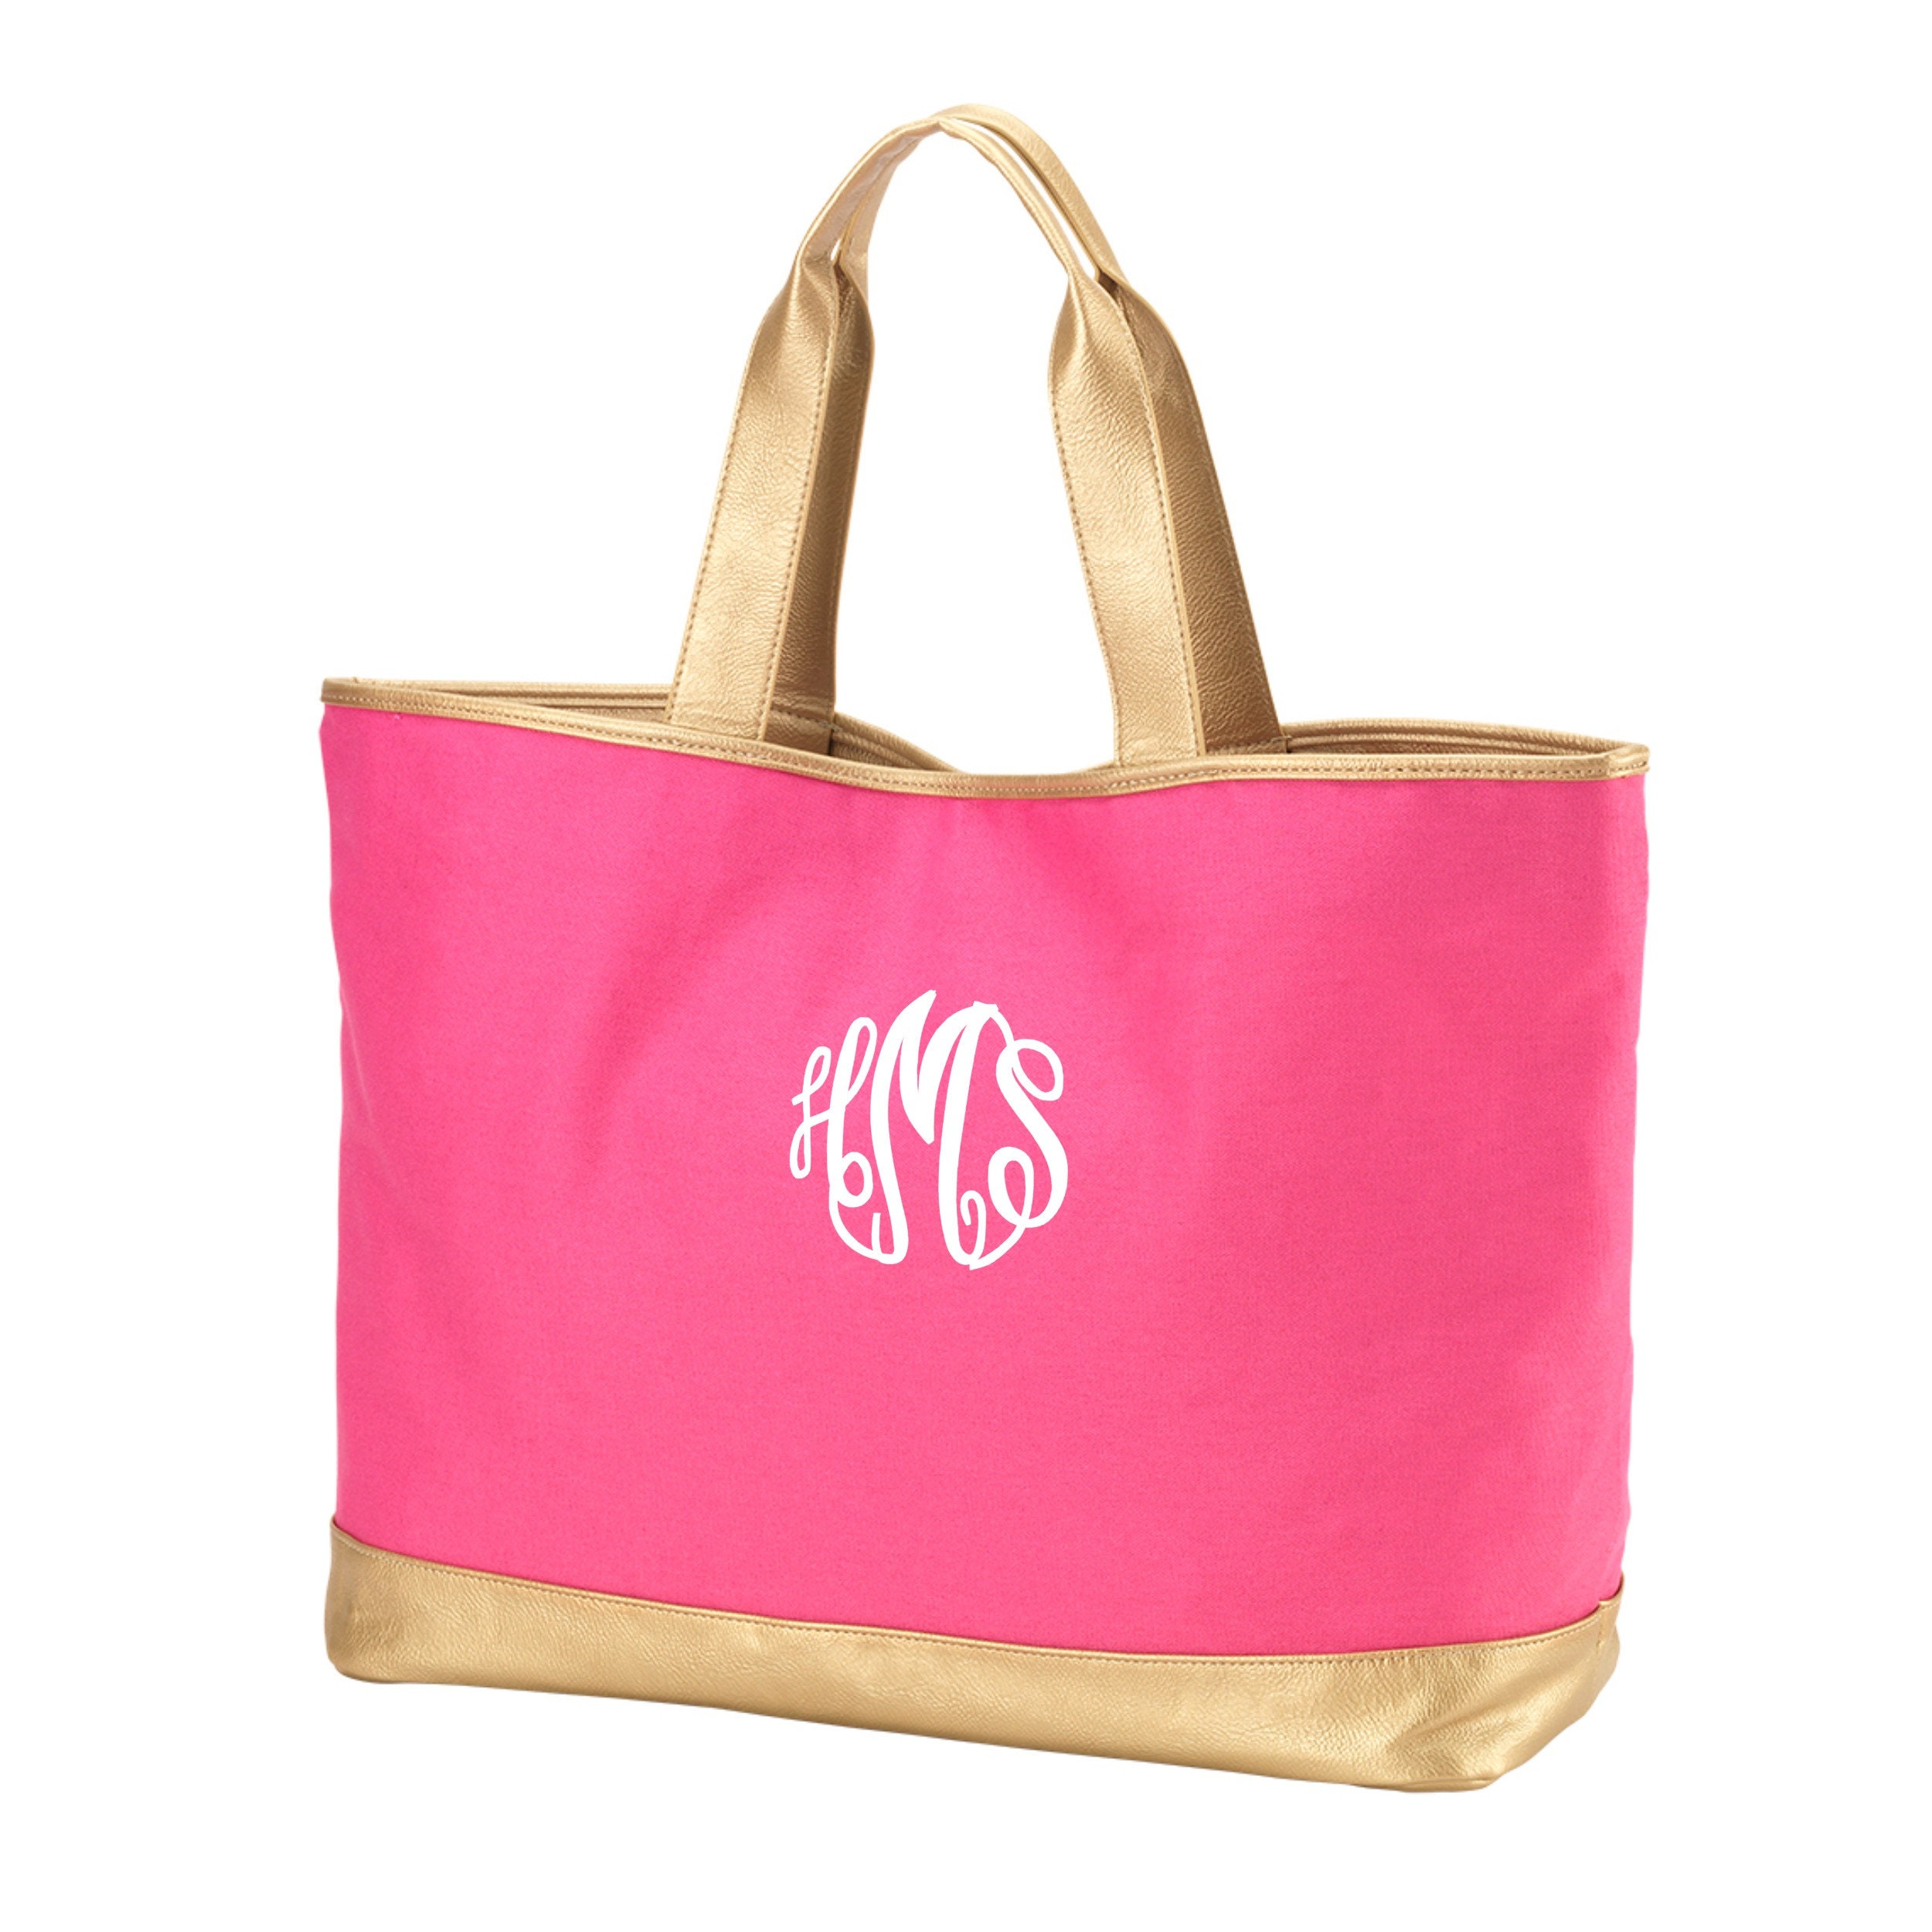 Personalized Tote Bag Monogrammed Beach Bag Embroidered 